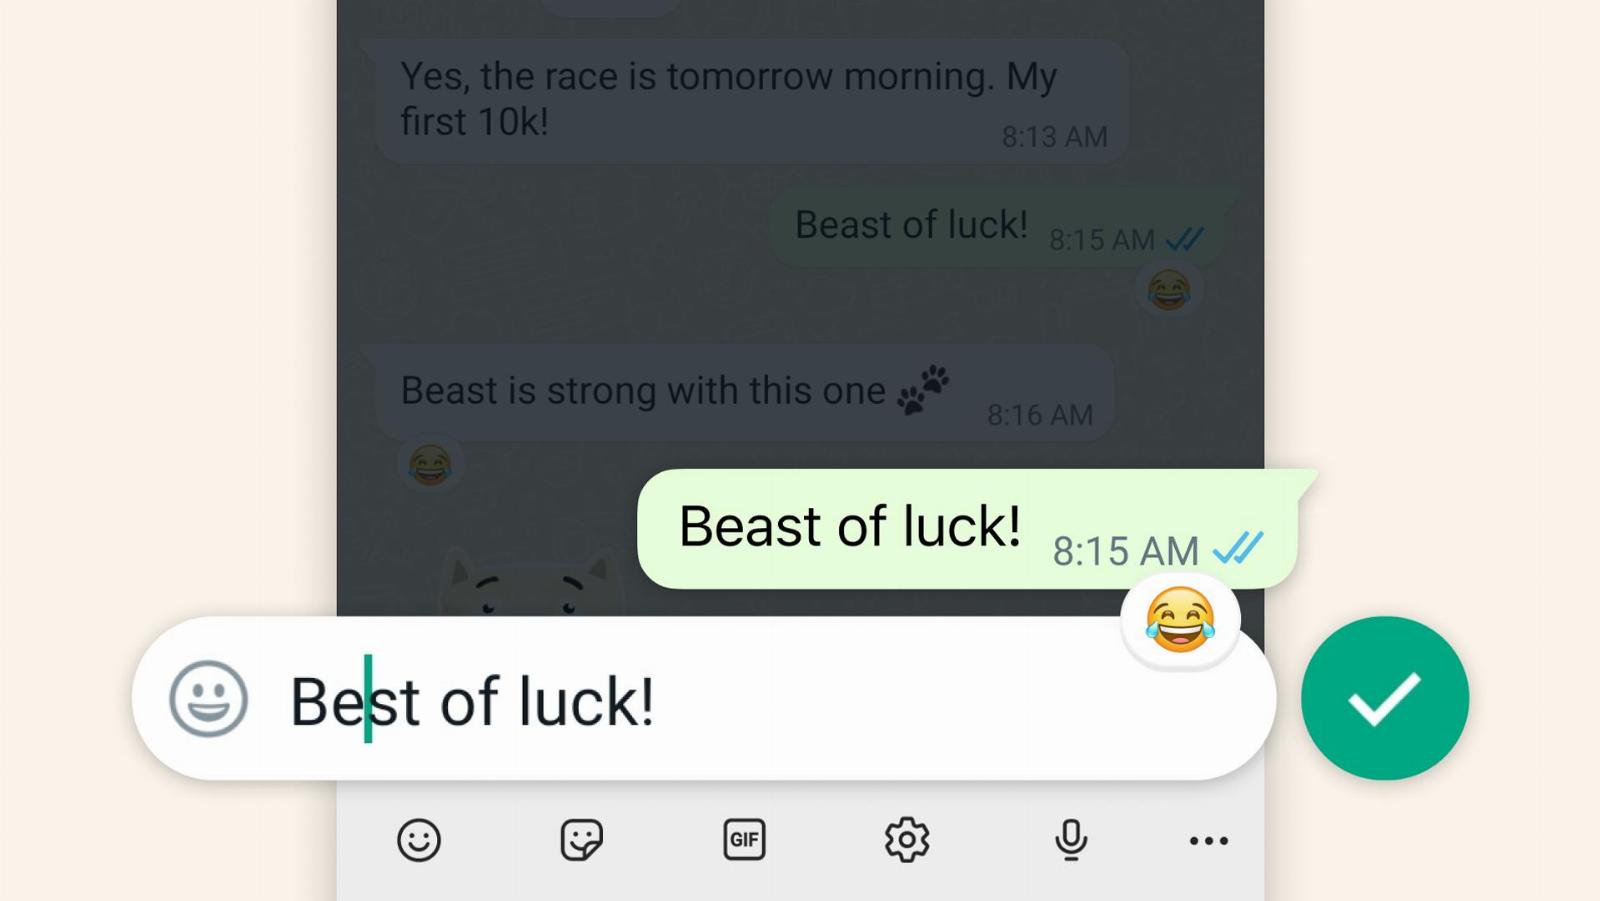 WhatsApp now lets you edit messages with a 15-minute time limit